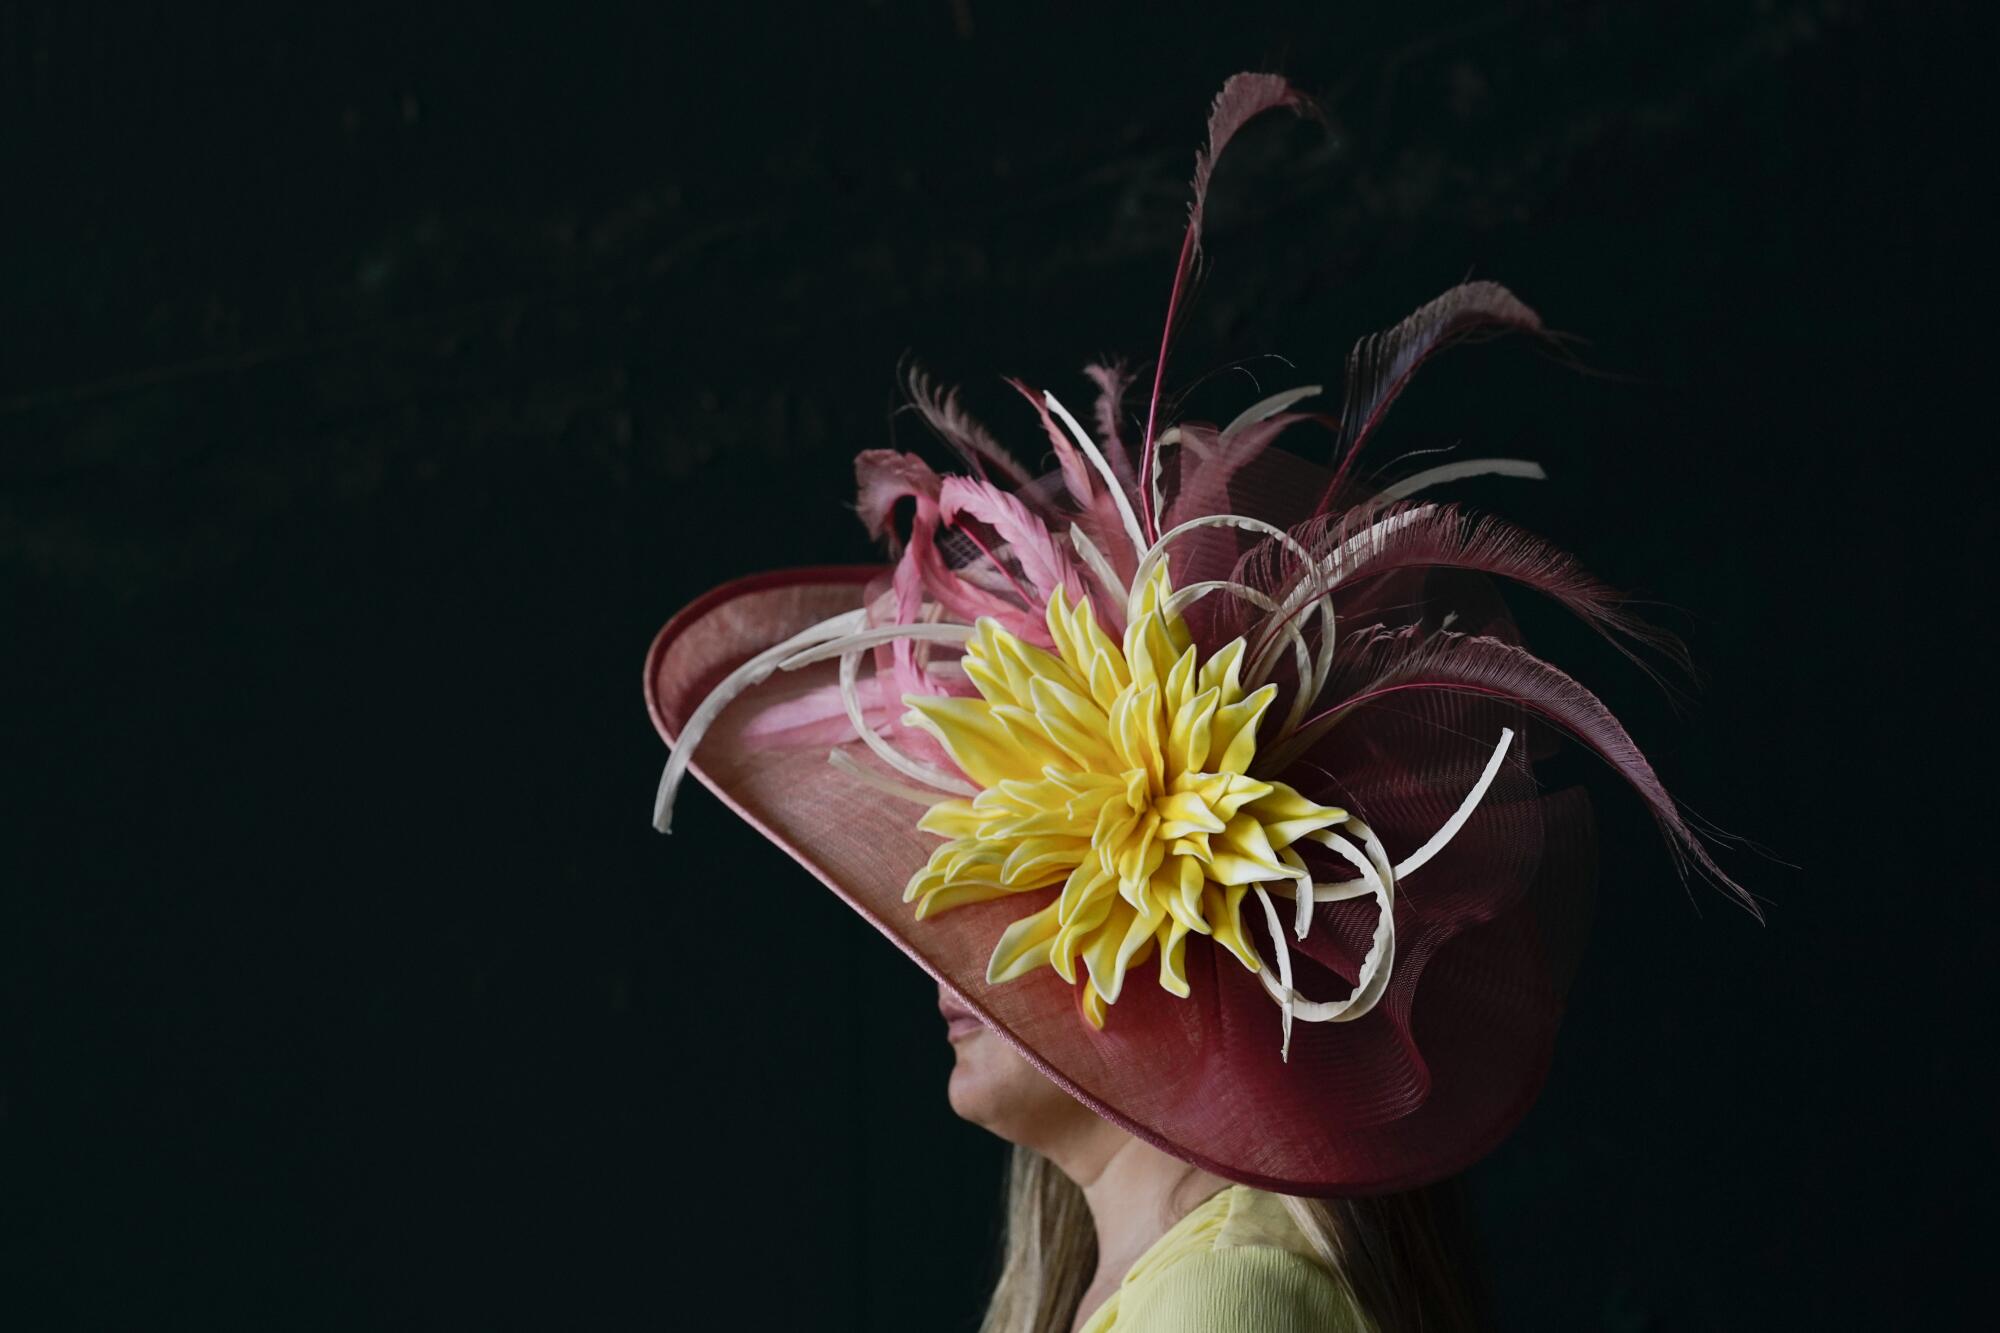 A woman wears a pink brimmed hat with a large yellow flower and pink feathers on it.